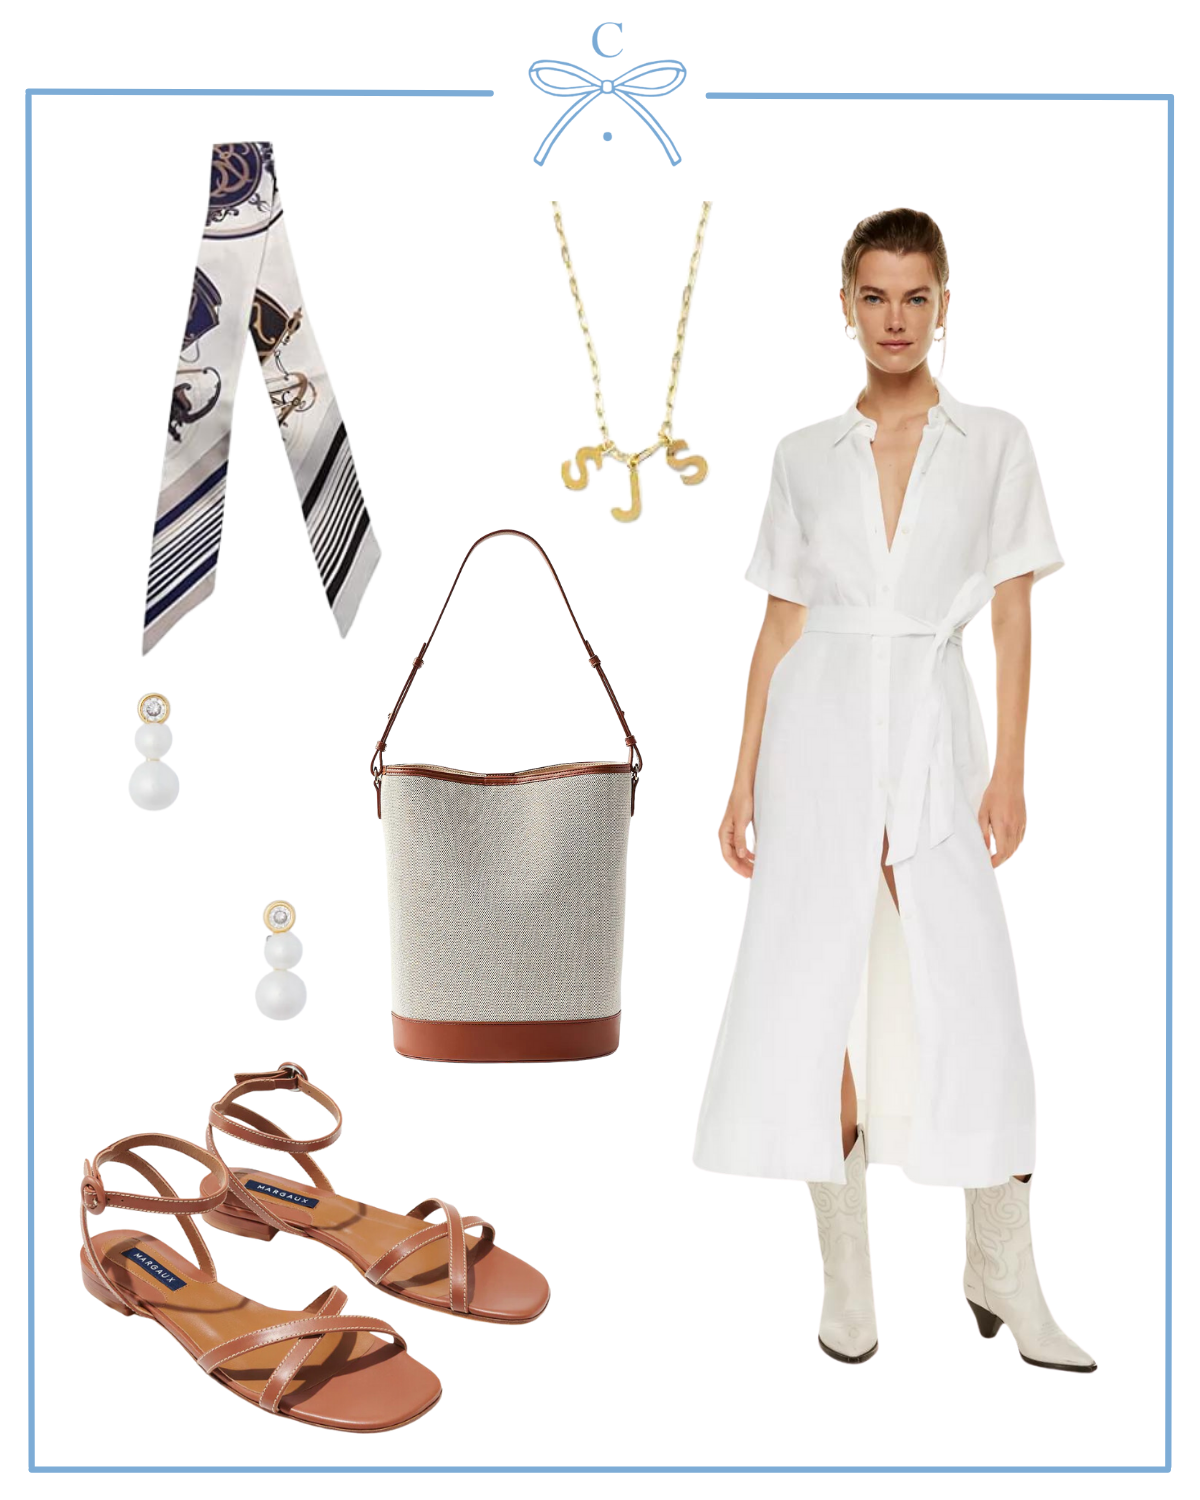 aritzia wilfred eleta linen dress, paravel dupe loft faux leather and canvas bucket bag, hart jewelry initial charm necklace, margaux flat sandal, amazon hair scarf, and tuckernuck double pearl mini studs